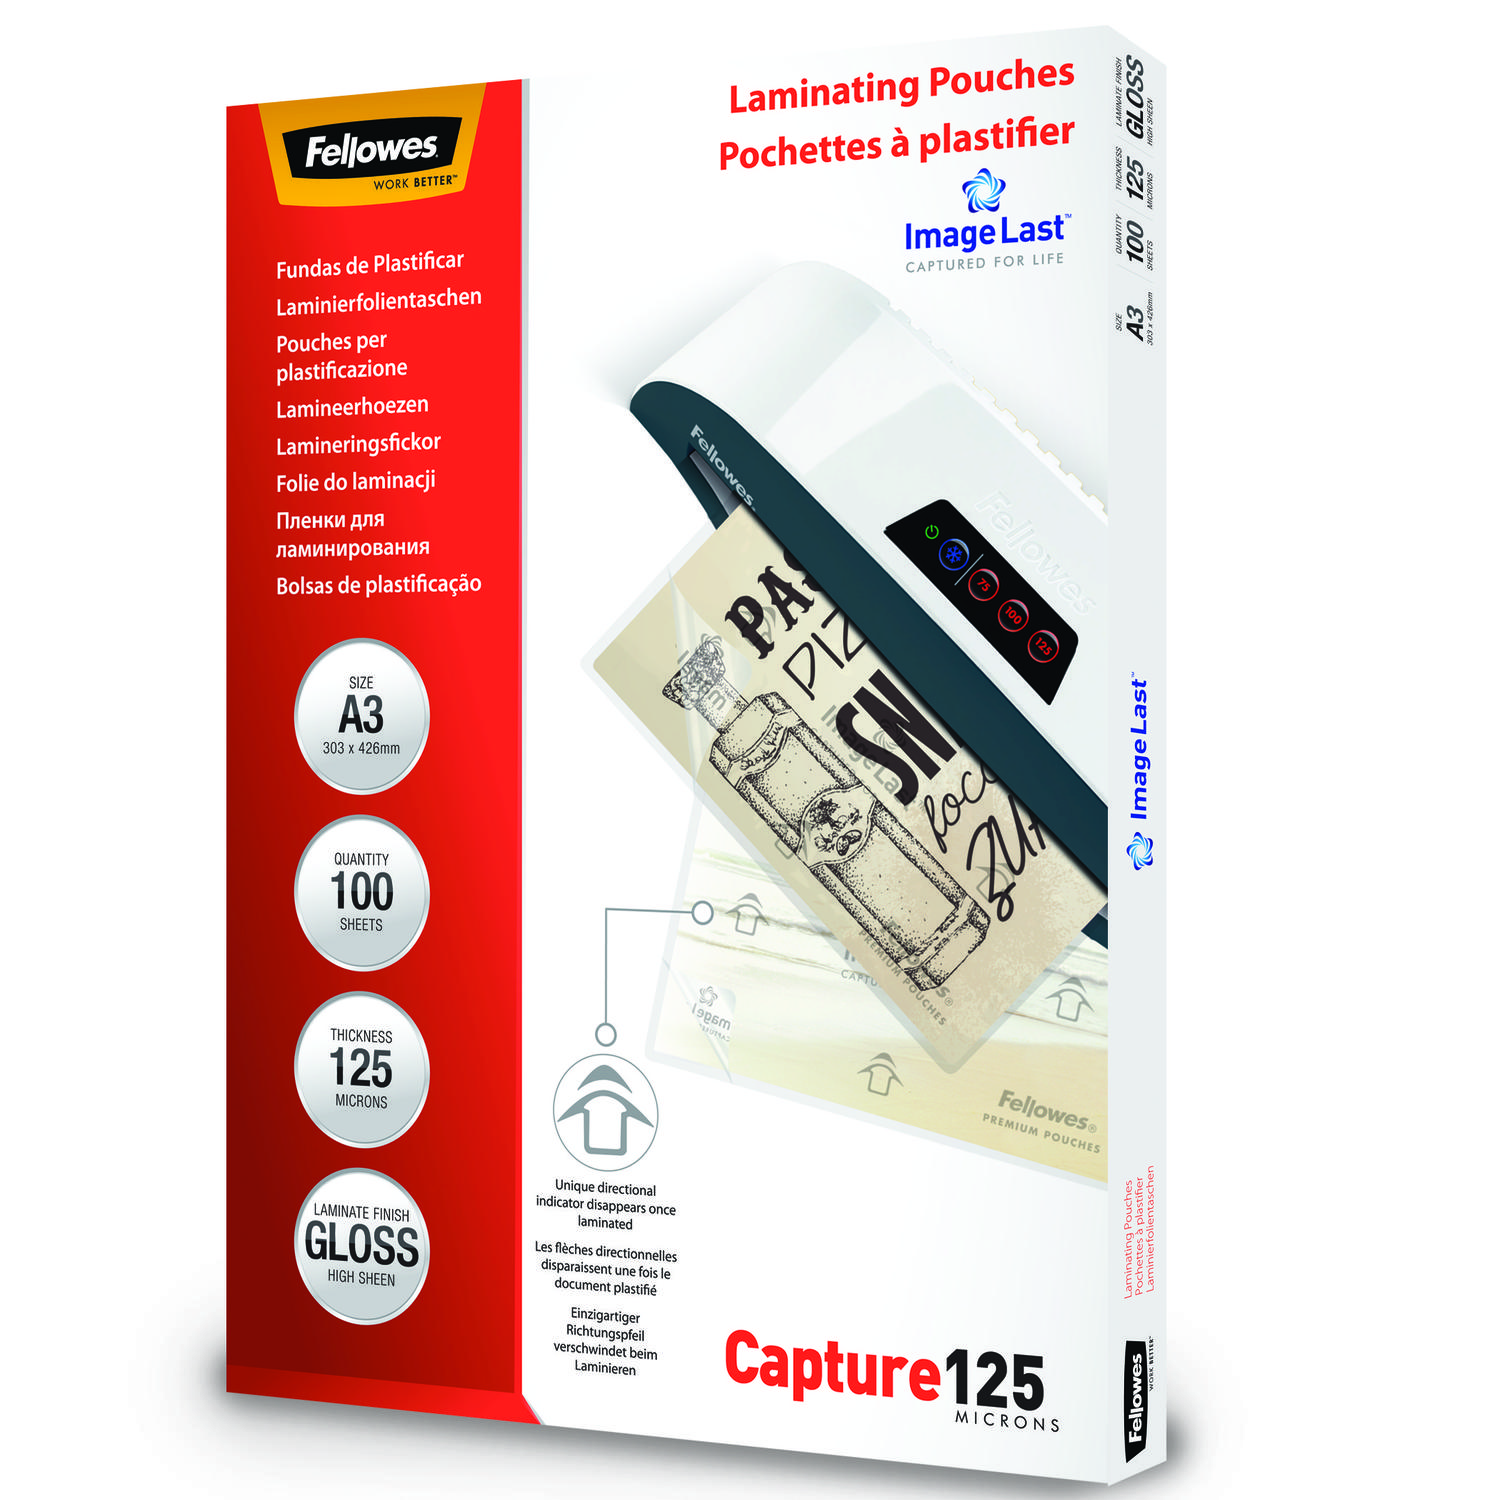 Laminating Film & Pockets Fellowes Laminating Pouch A3 2x125 Micron Gloss (Pack 100) 5307506